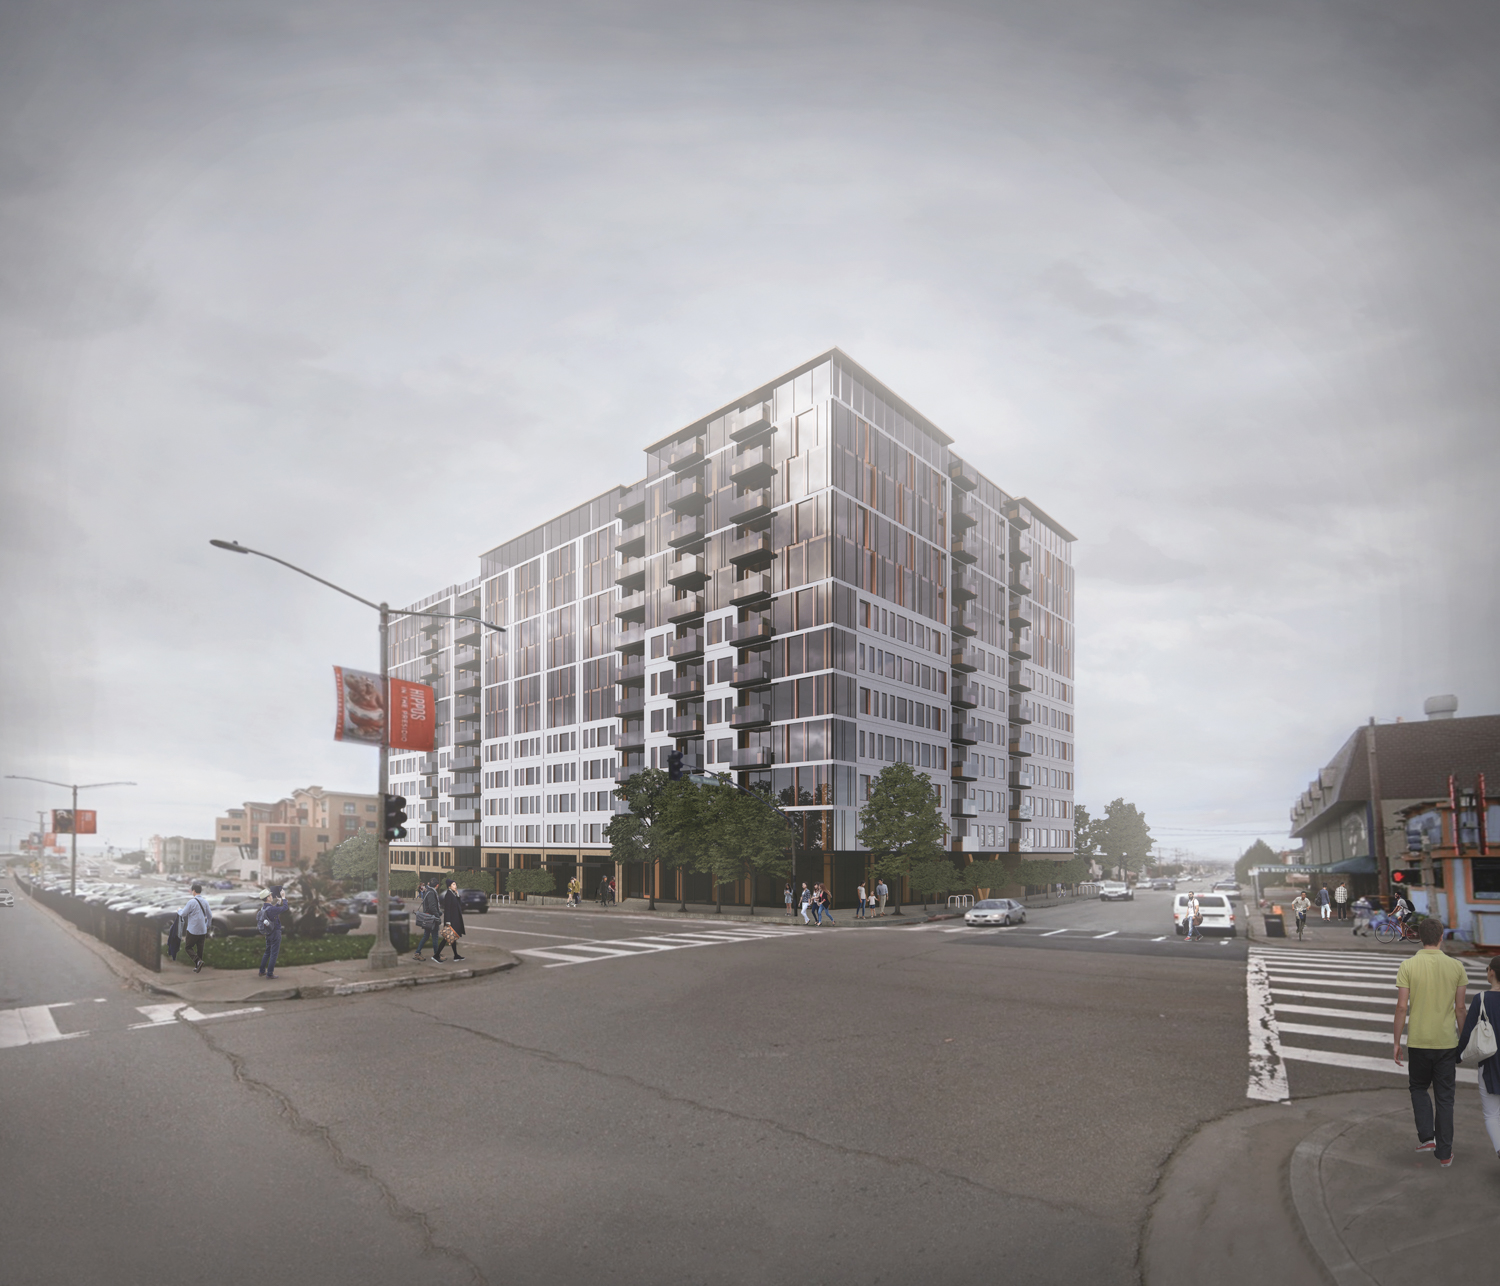 2700 Sloat Boulevard from 45th and Sloat depicted shrouded in fog, rendering by Korb + Associates Architects